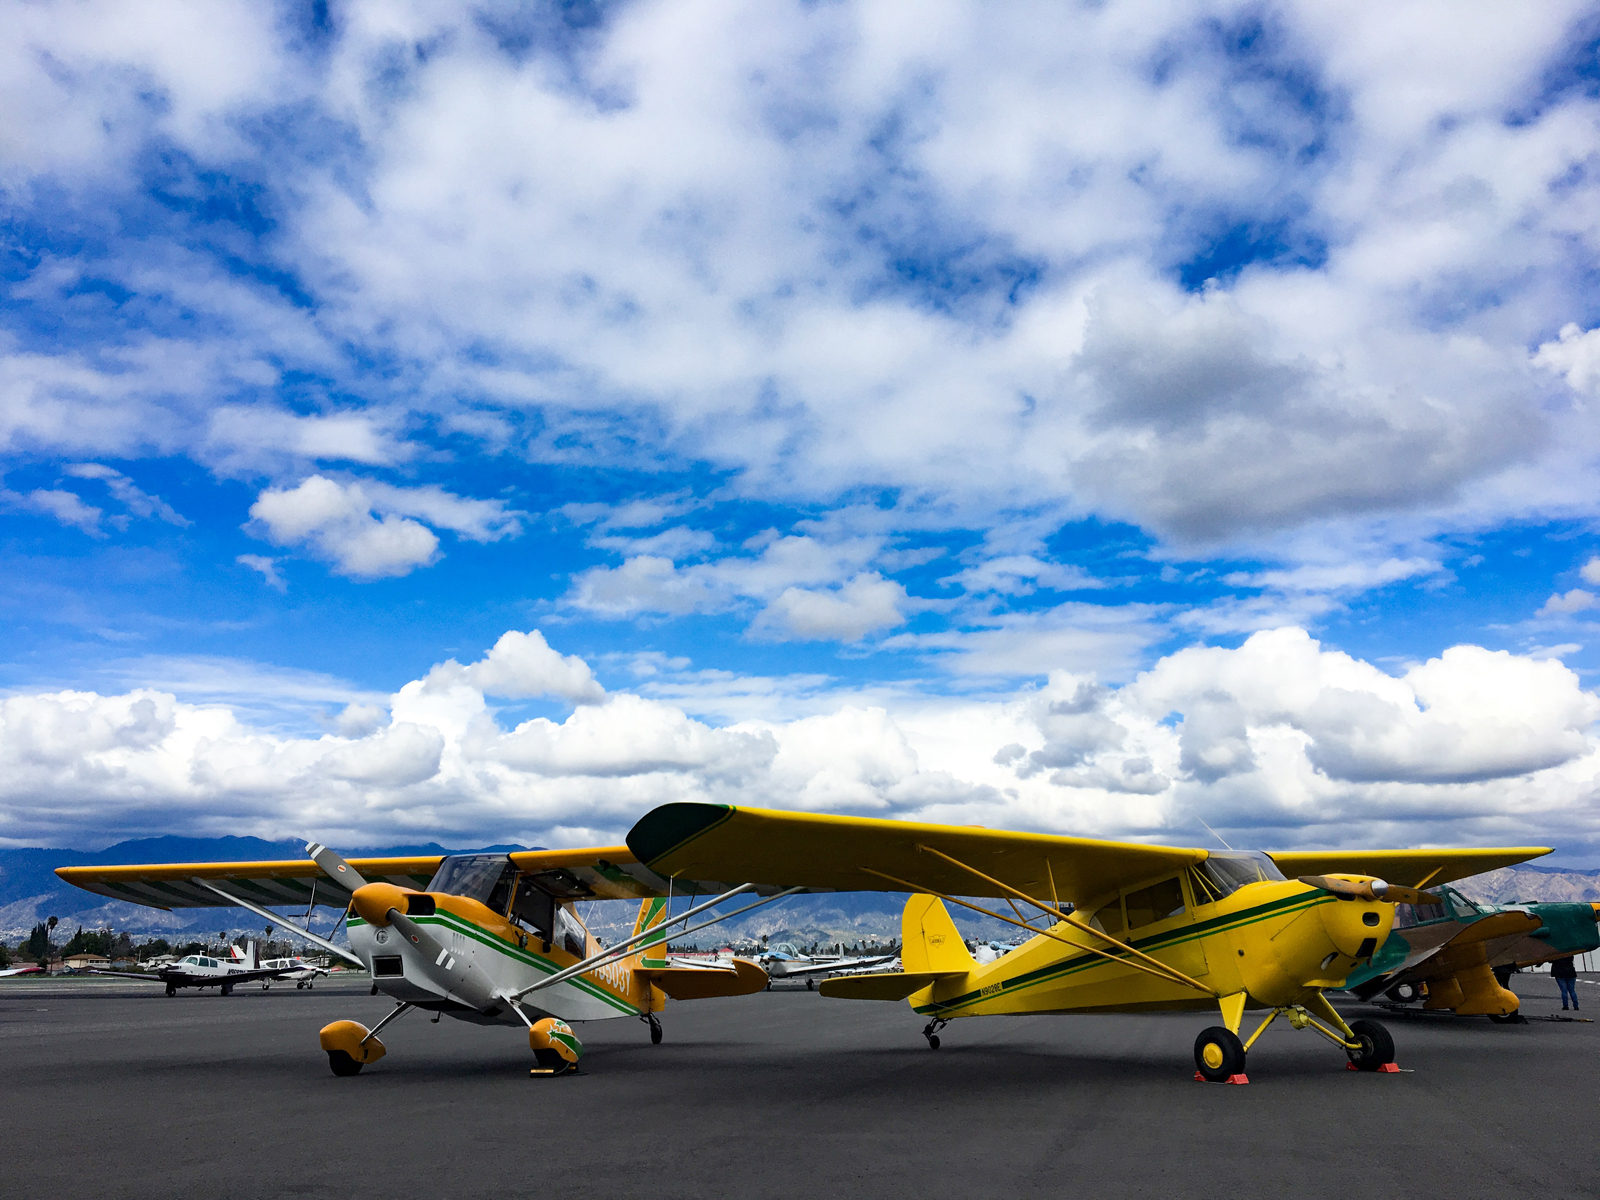 Photo of two yellow airplanes